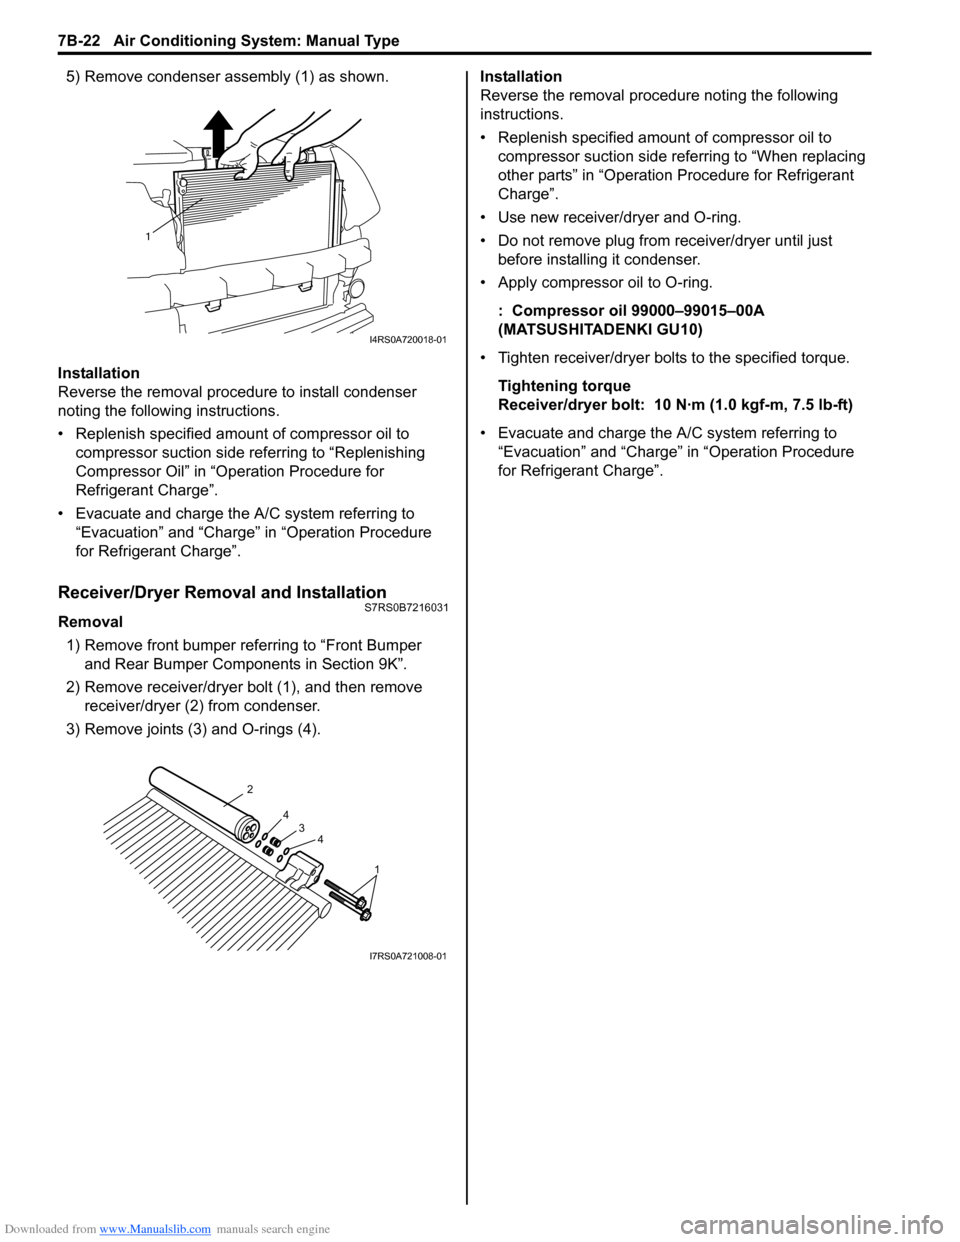 SUZUKI SWIFT 2008 2.G Service Owners Manual Downloaded from www.Manualslib.com manuals search engine 7B-22 Air Conditioning System: Manual Type
5) Remove condenser assembly (1) as shown.
Installation
Reverse the removal procedure to install con